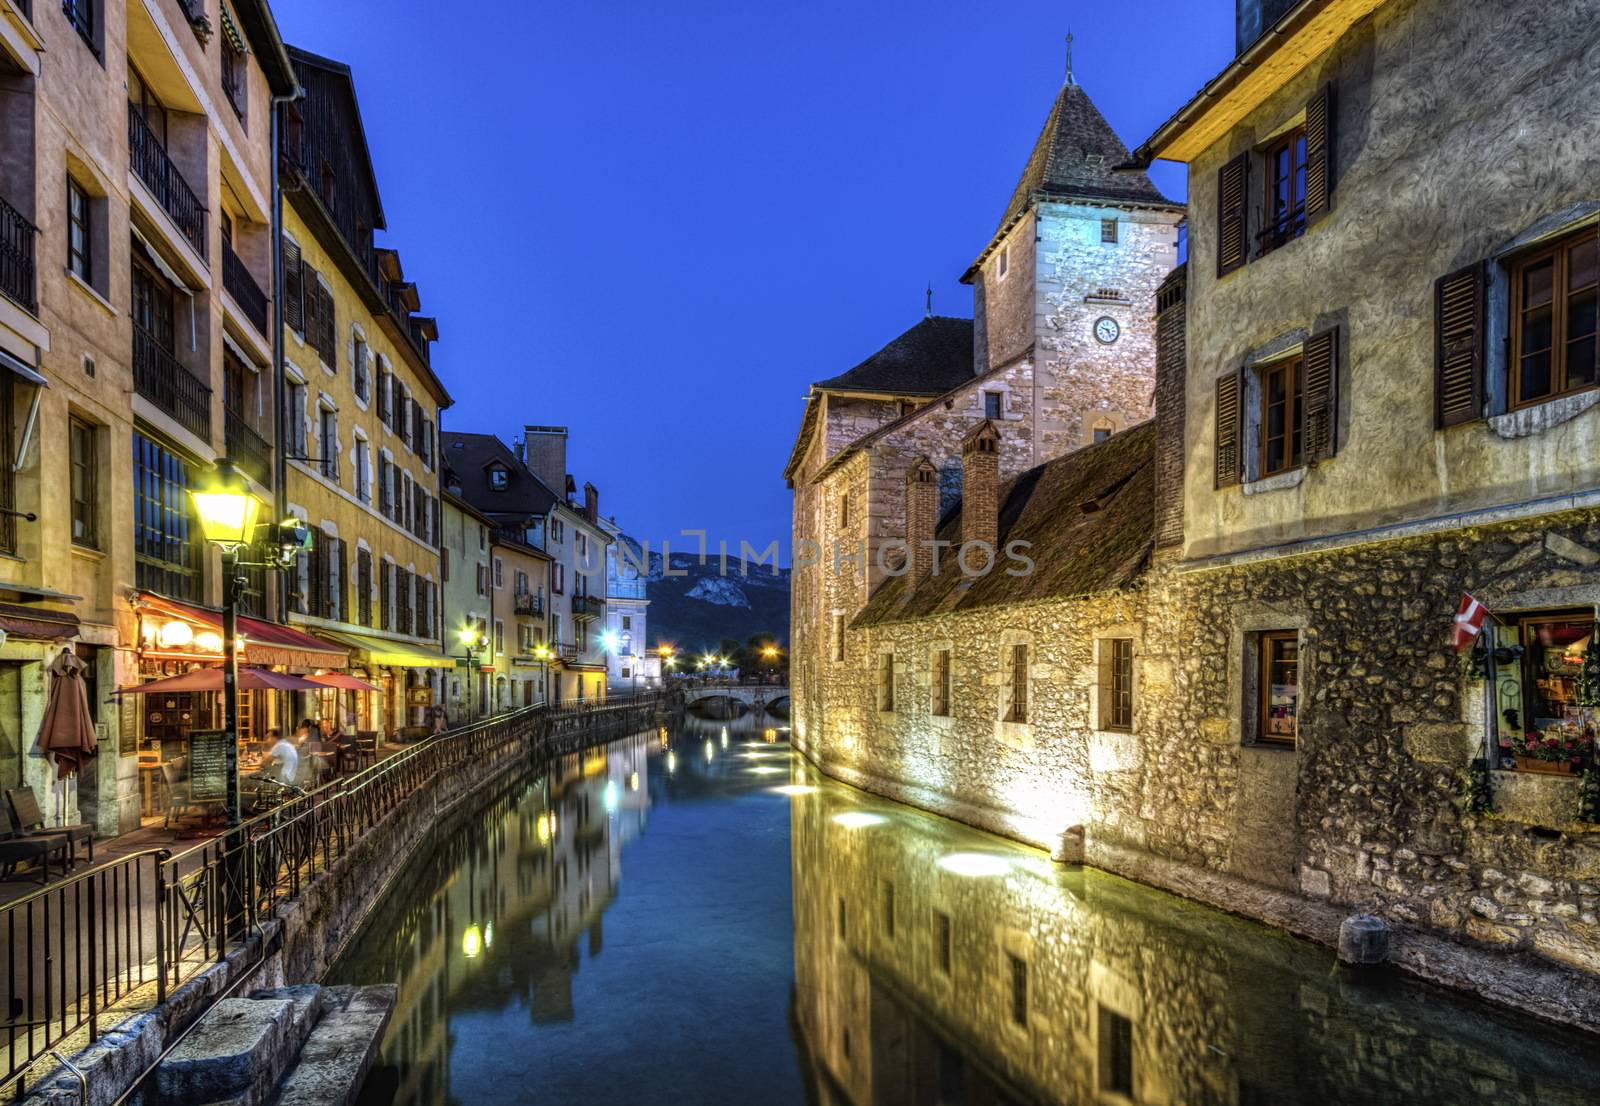 Palais de l'Ile jail and canal in Annecy old city, France, HDR by Elenaphotos21